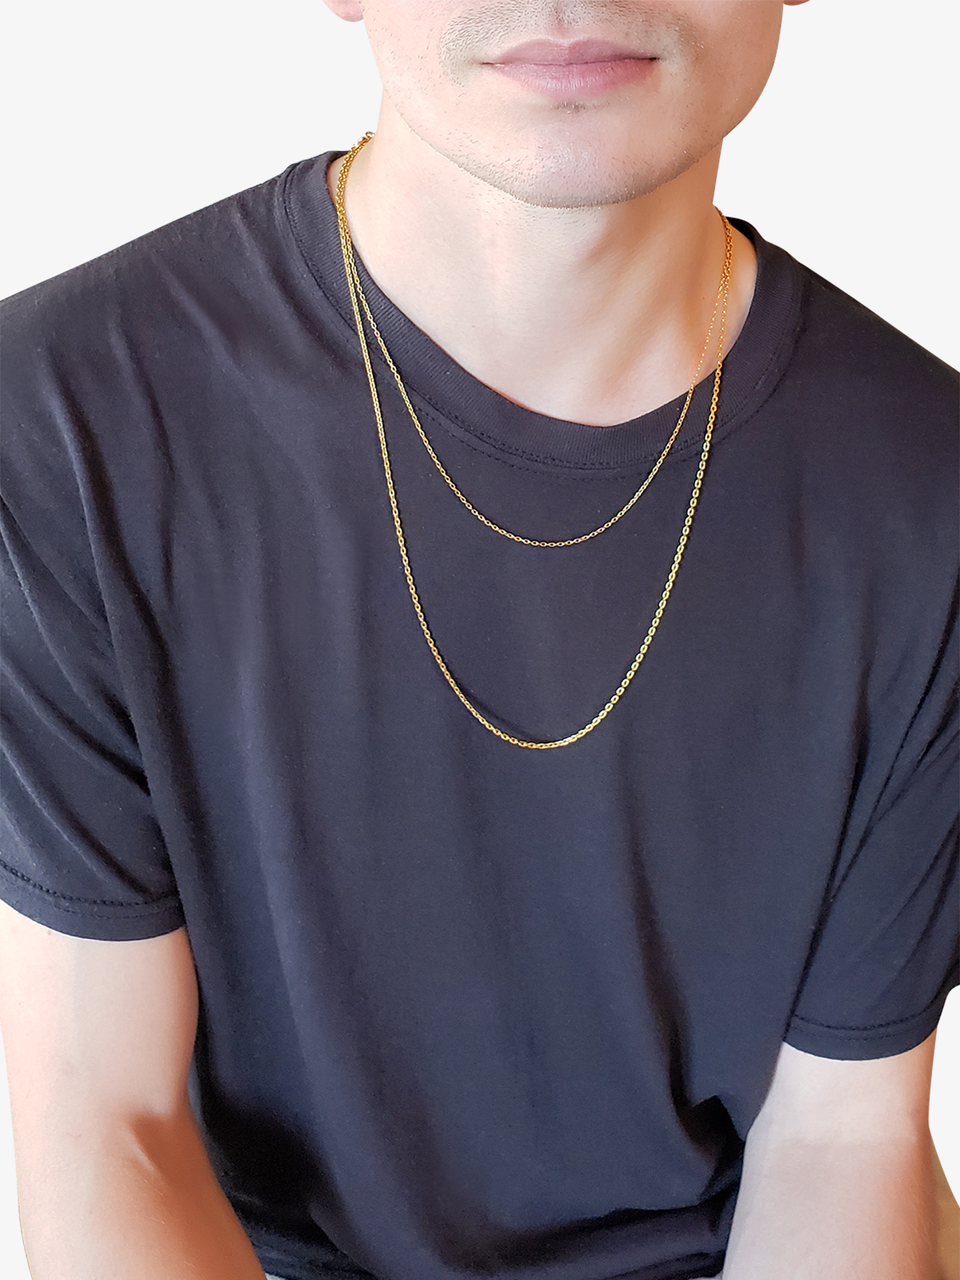 Gold Stainless Steel Cable Necklace | Mojo Supply Co